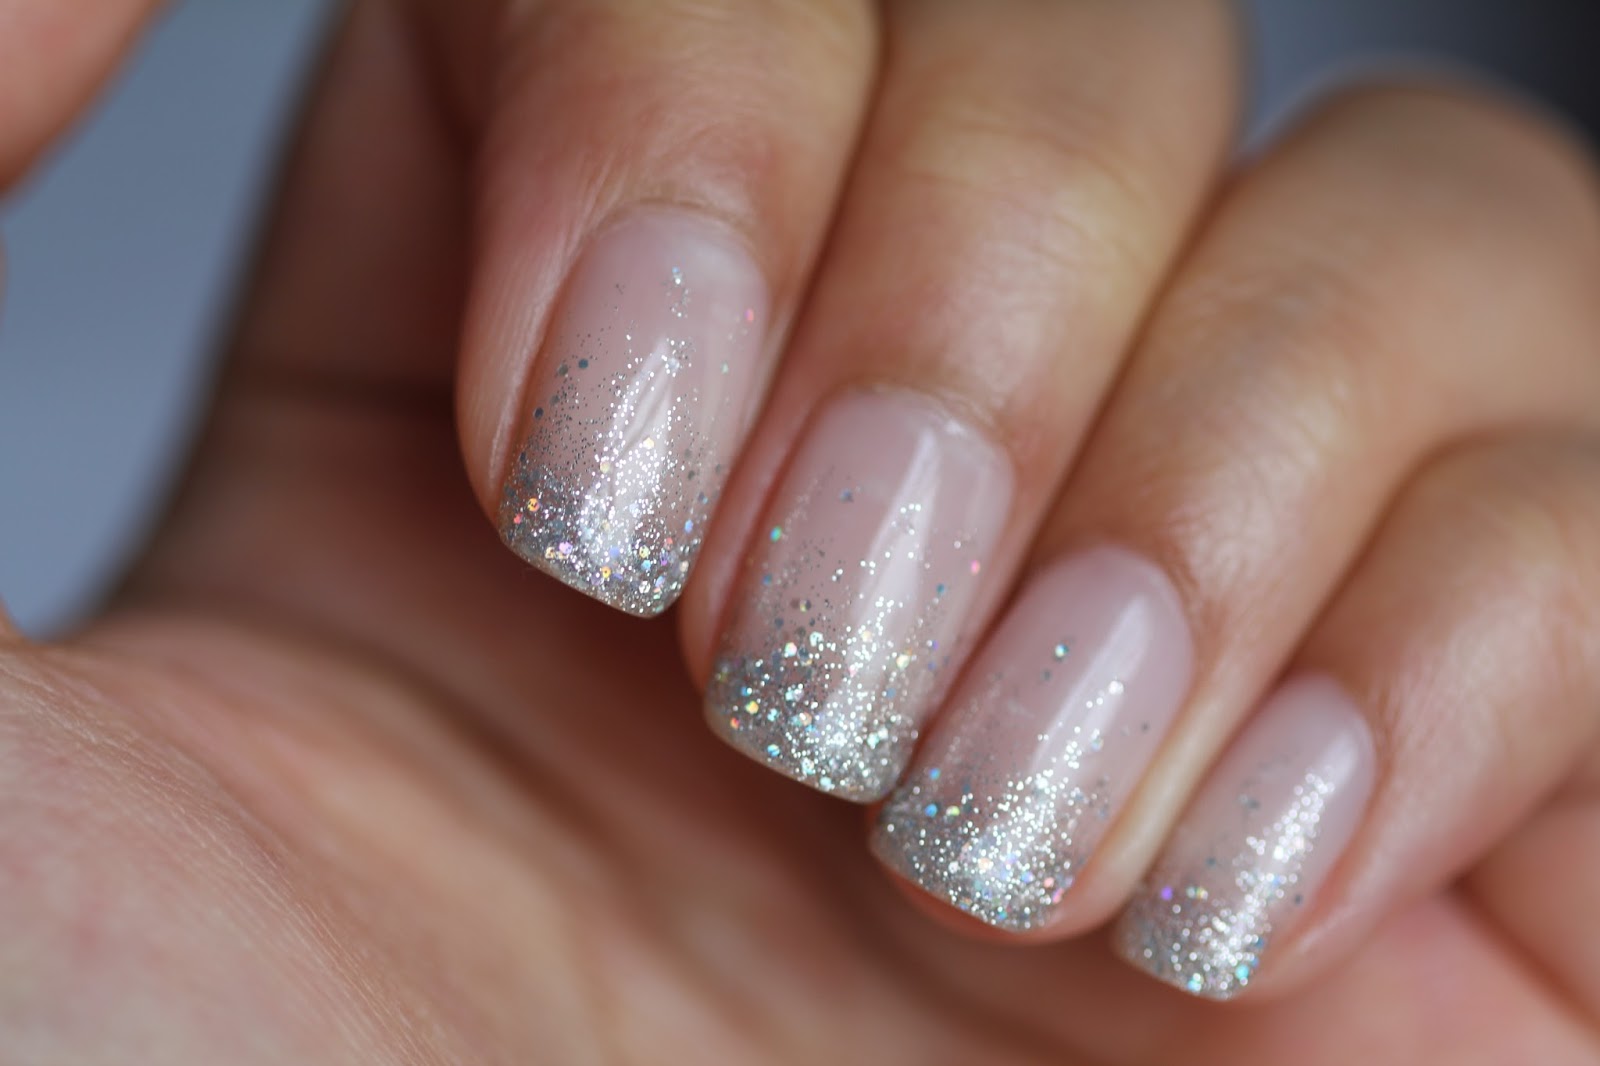 6. Glittery French Nails - wide 4